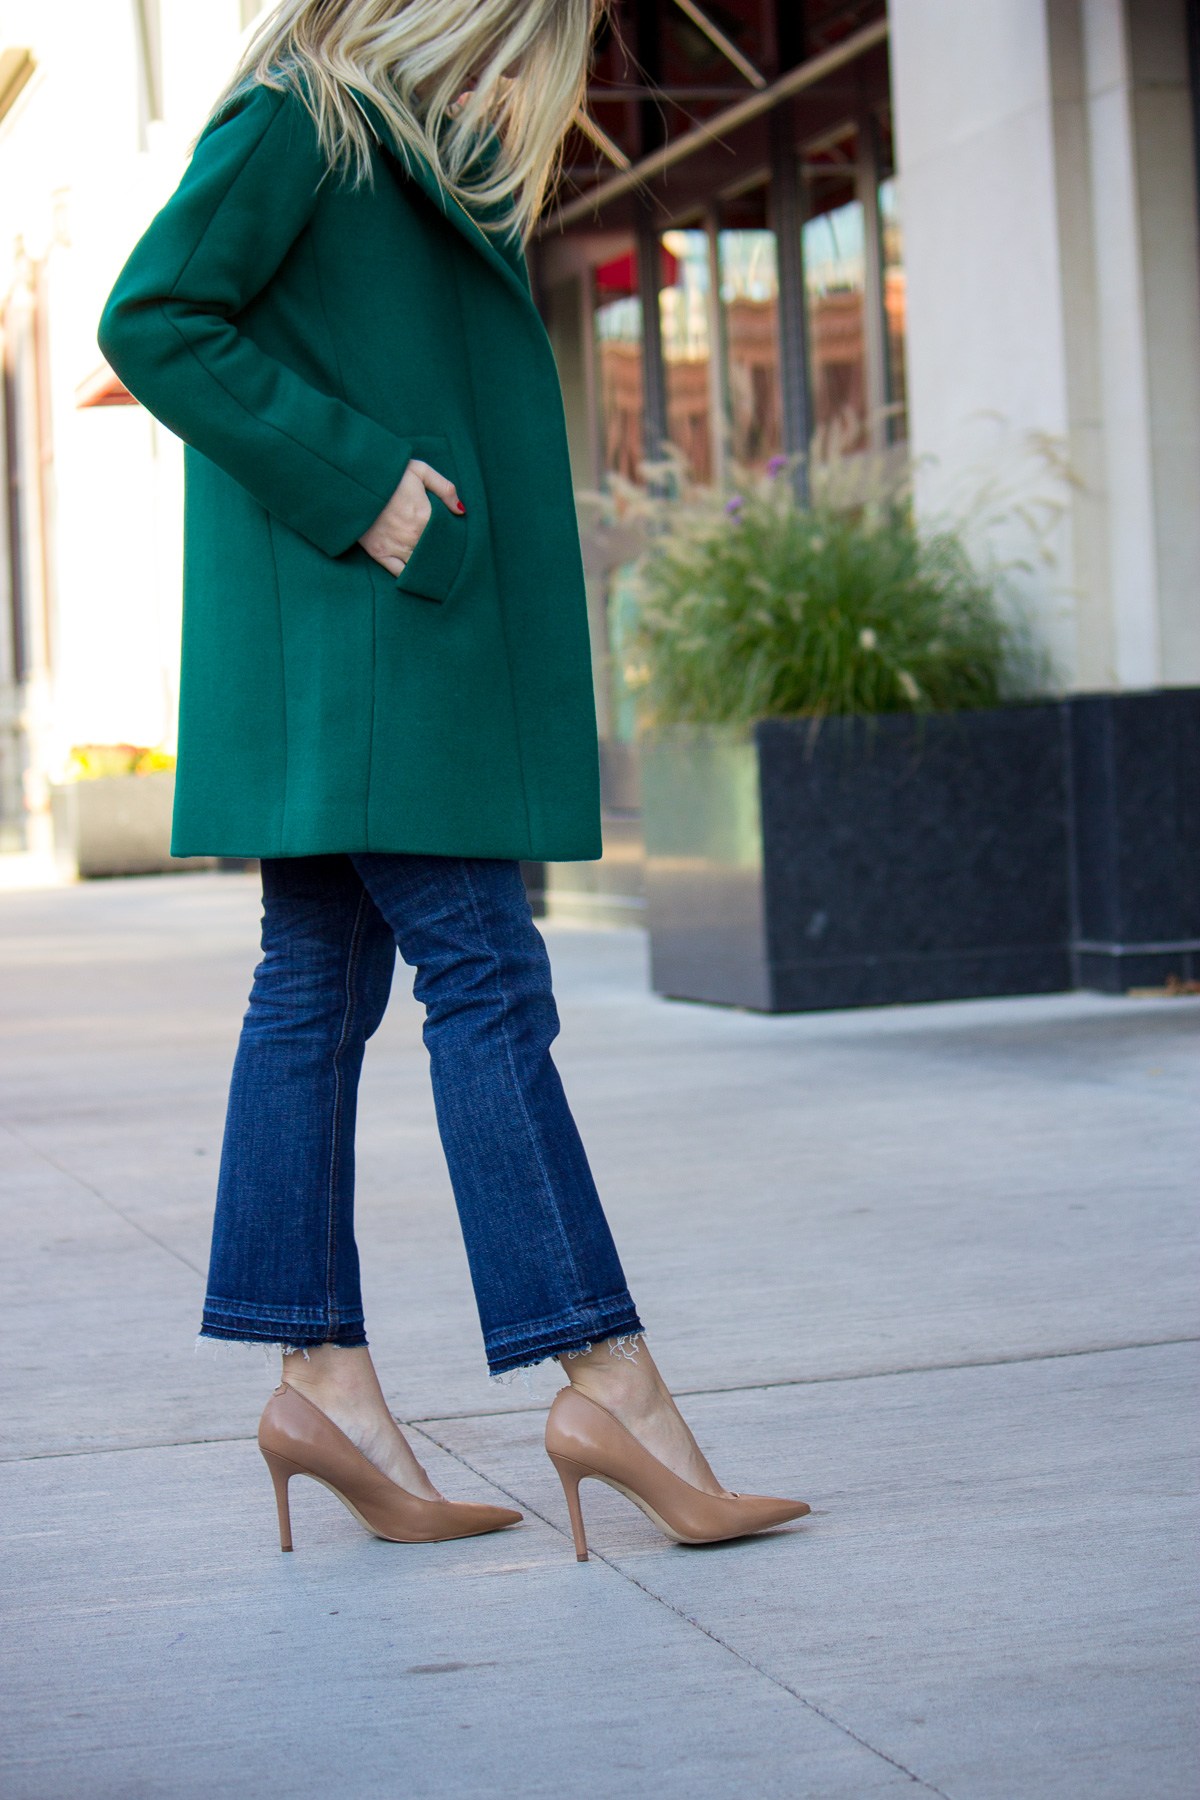 Colorful Coat for Fall